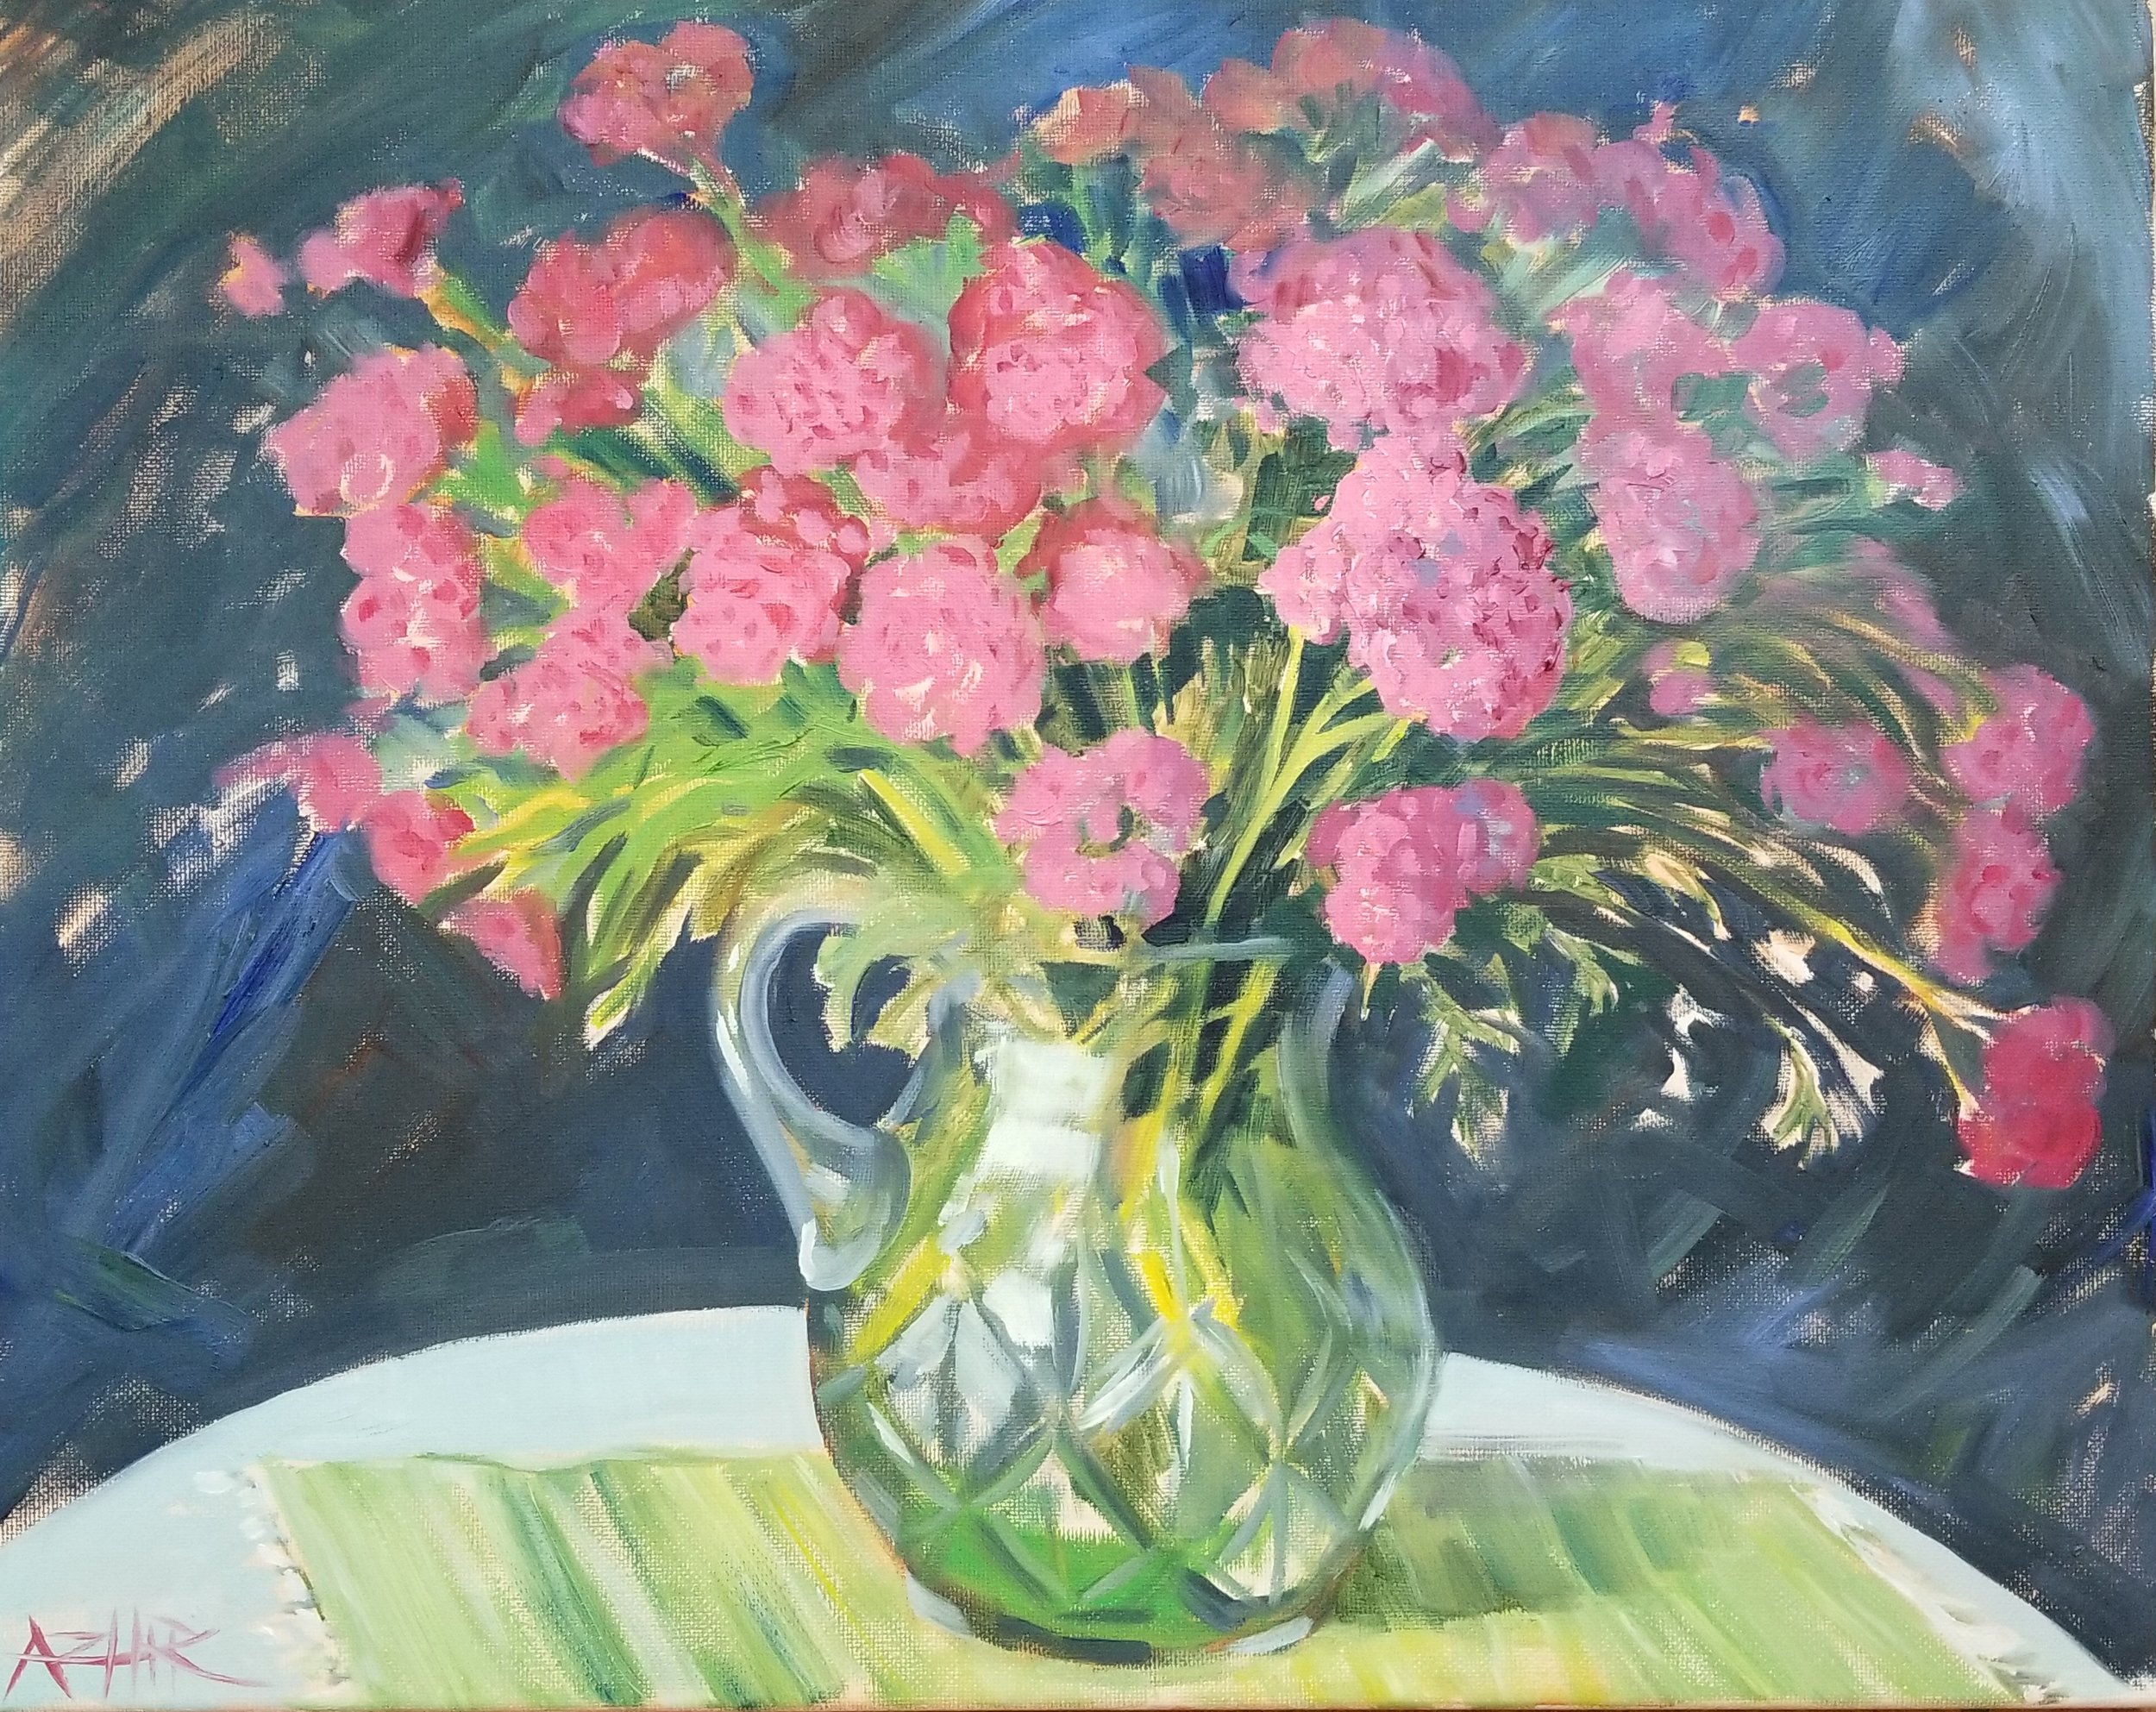 SOLD, Yarrow Flowers in the Cut Glass Vase, Copyright 2017, Oil on Canvas, 16" x 20"